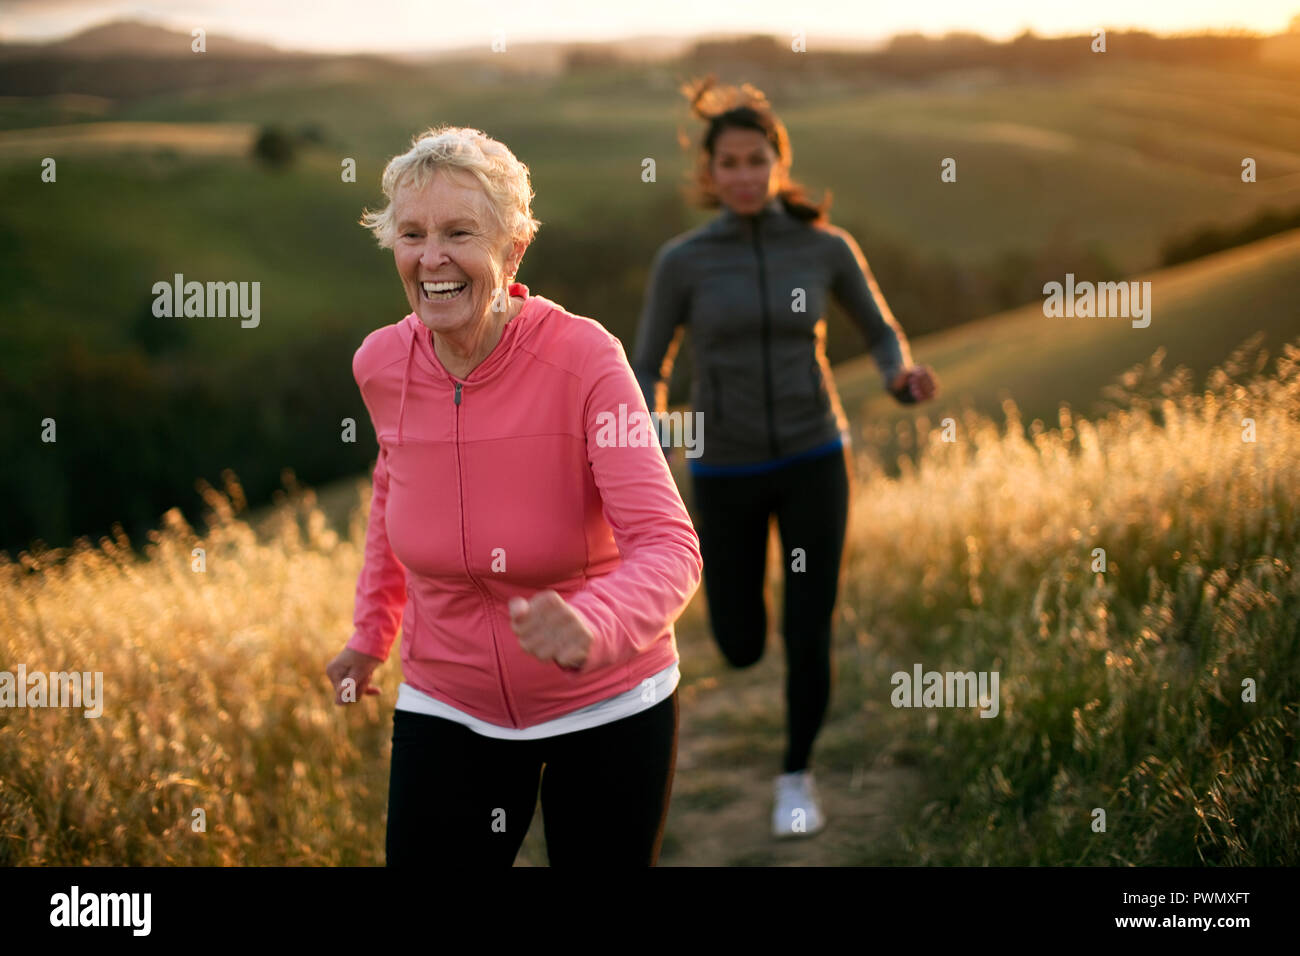 Two women exercising together in a rural landscape. Stock Photo